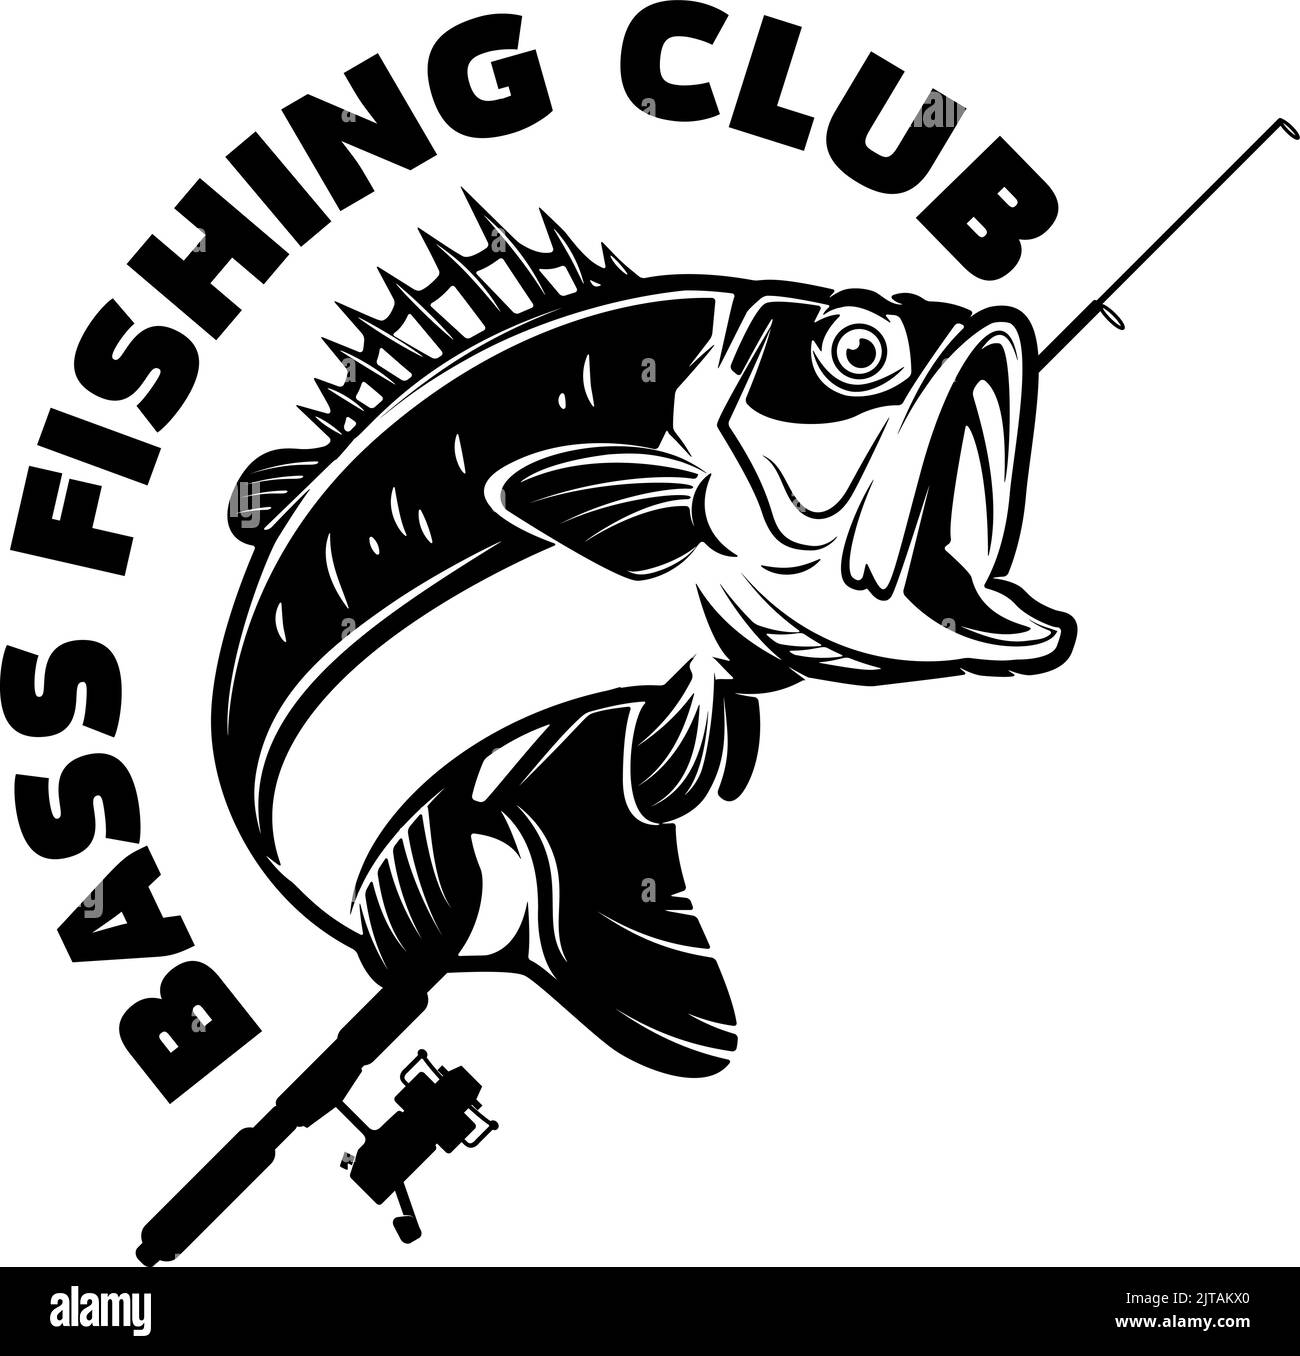 Bass fishing club. Bass fish and fishing rod. Design element for logo, label, sign, badge. Vector illustration Stock Vector